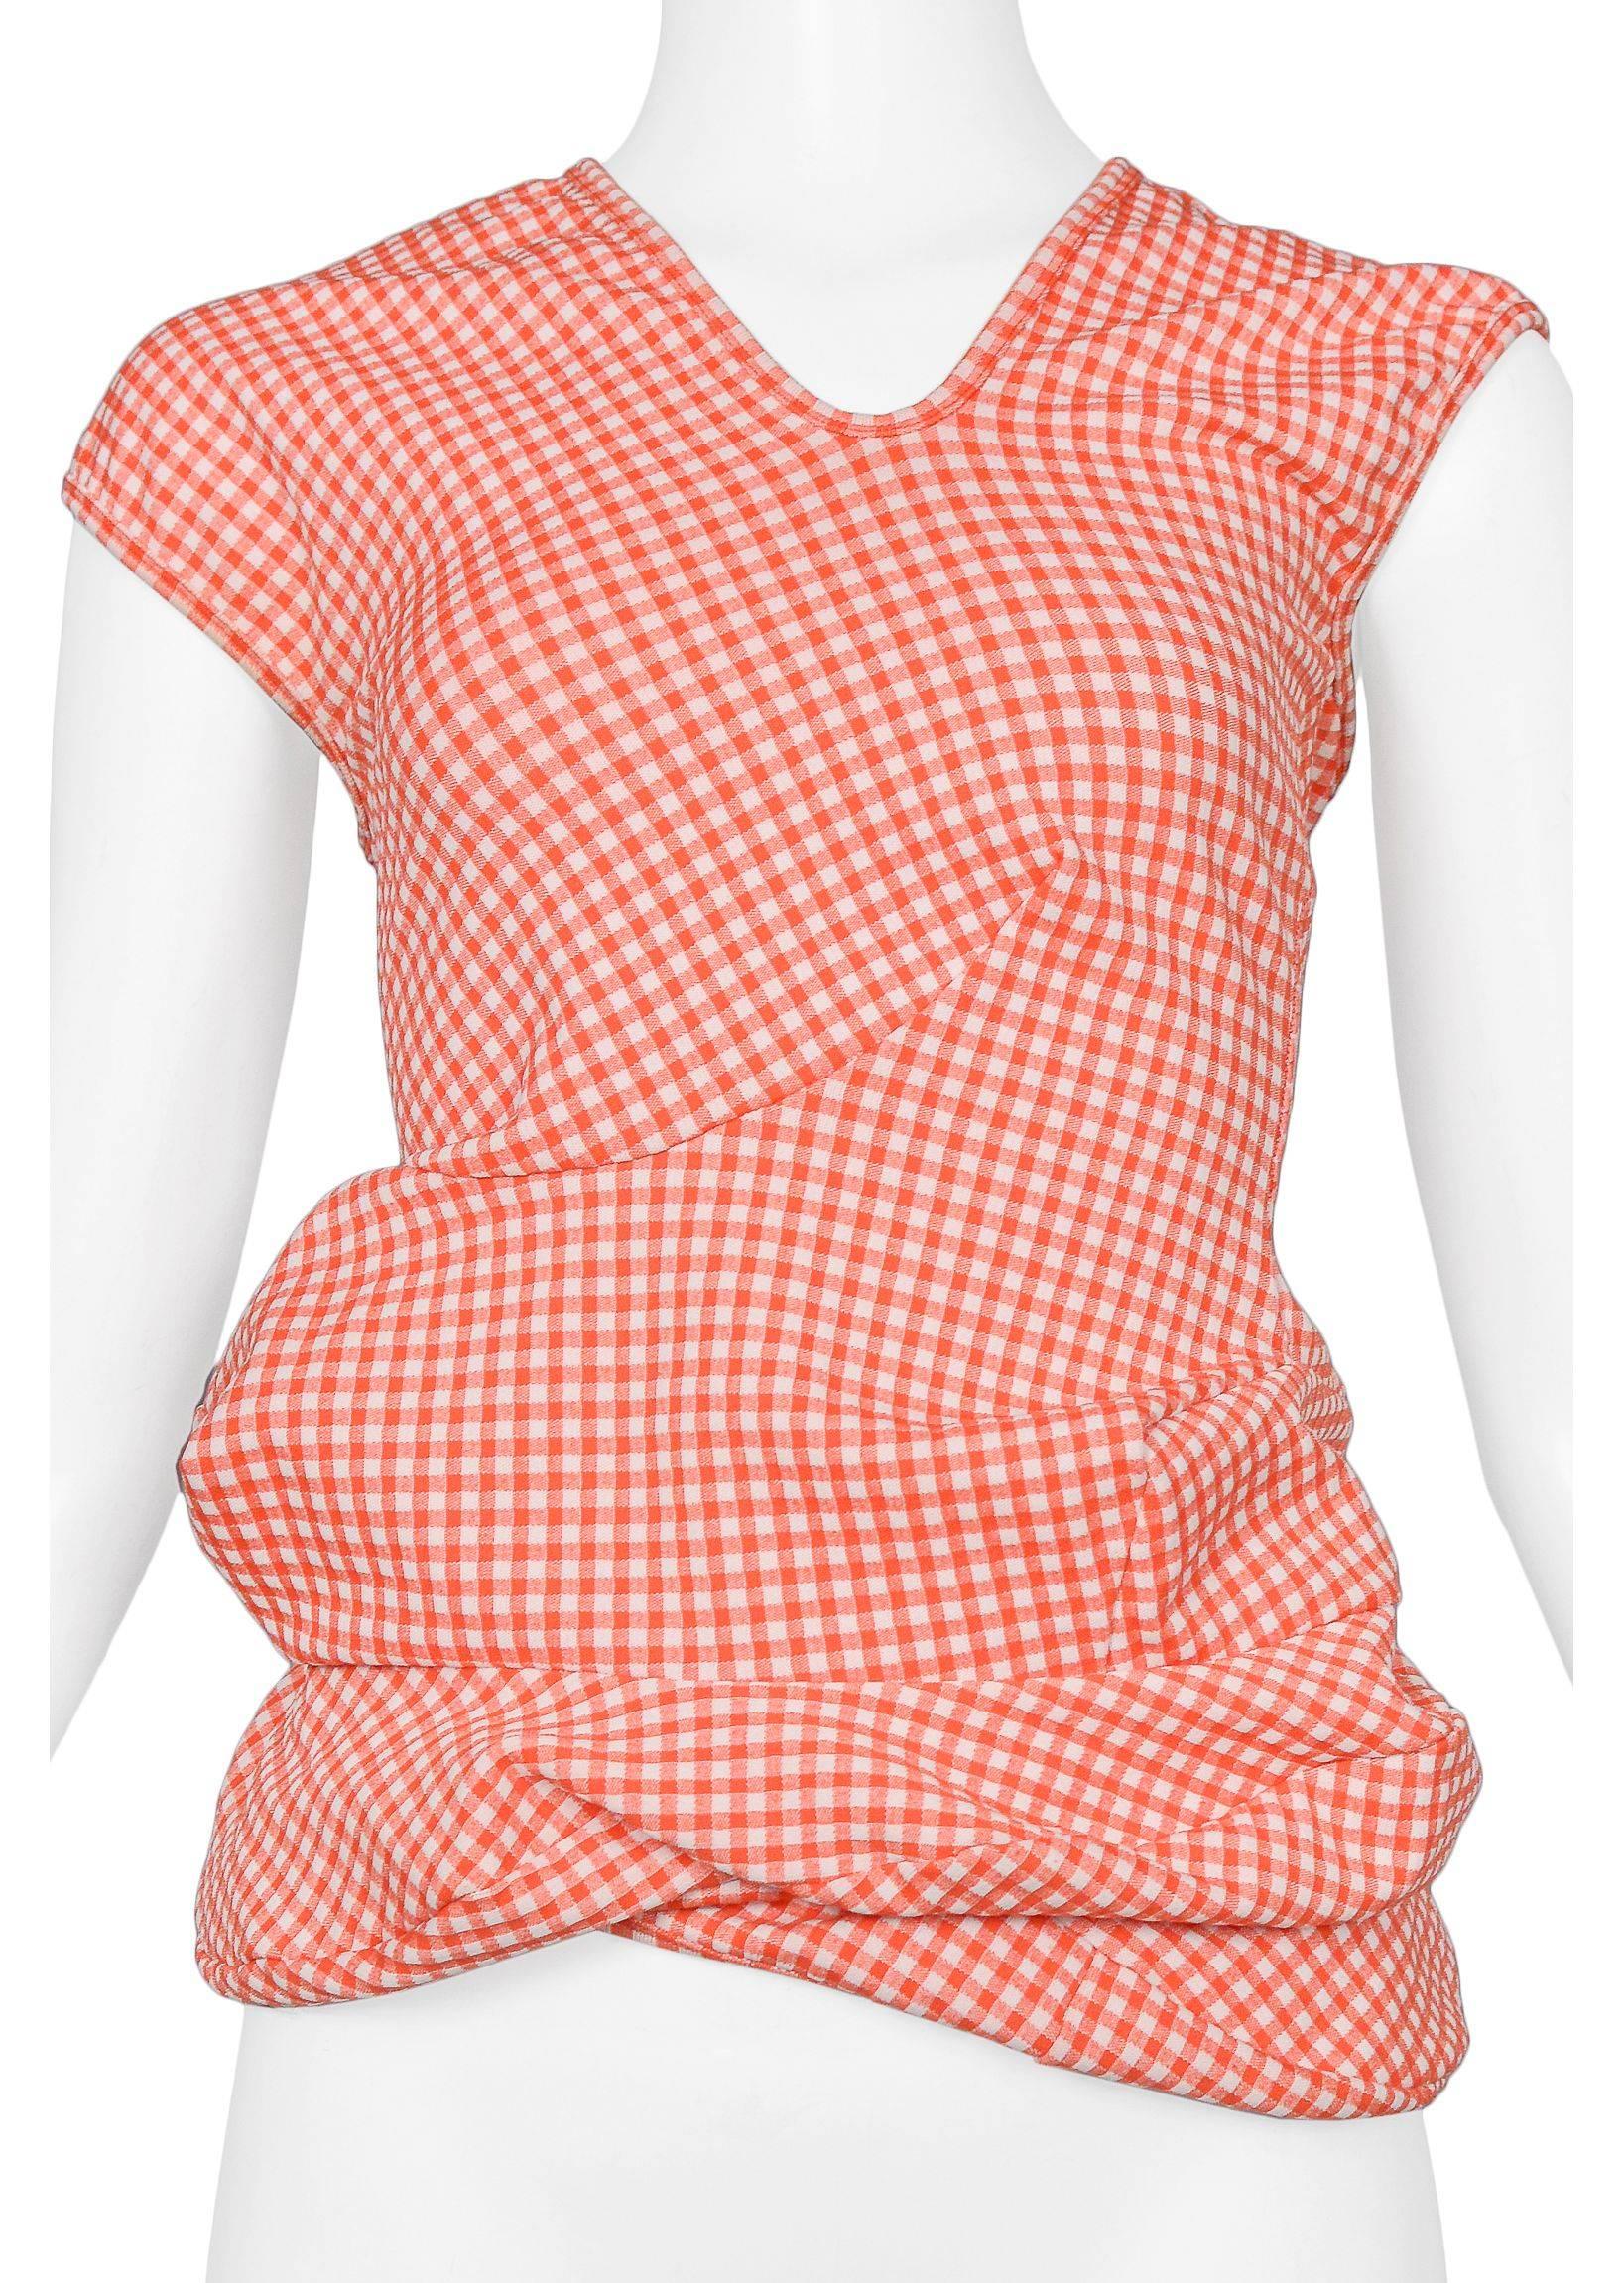 Museum Quality Comme des Garcons Lumps & Bumps SS 1997 Red Gingham Top In Excellent Condition For Sale In Los Angeles, CA